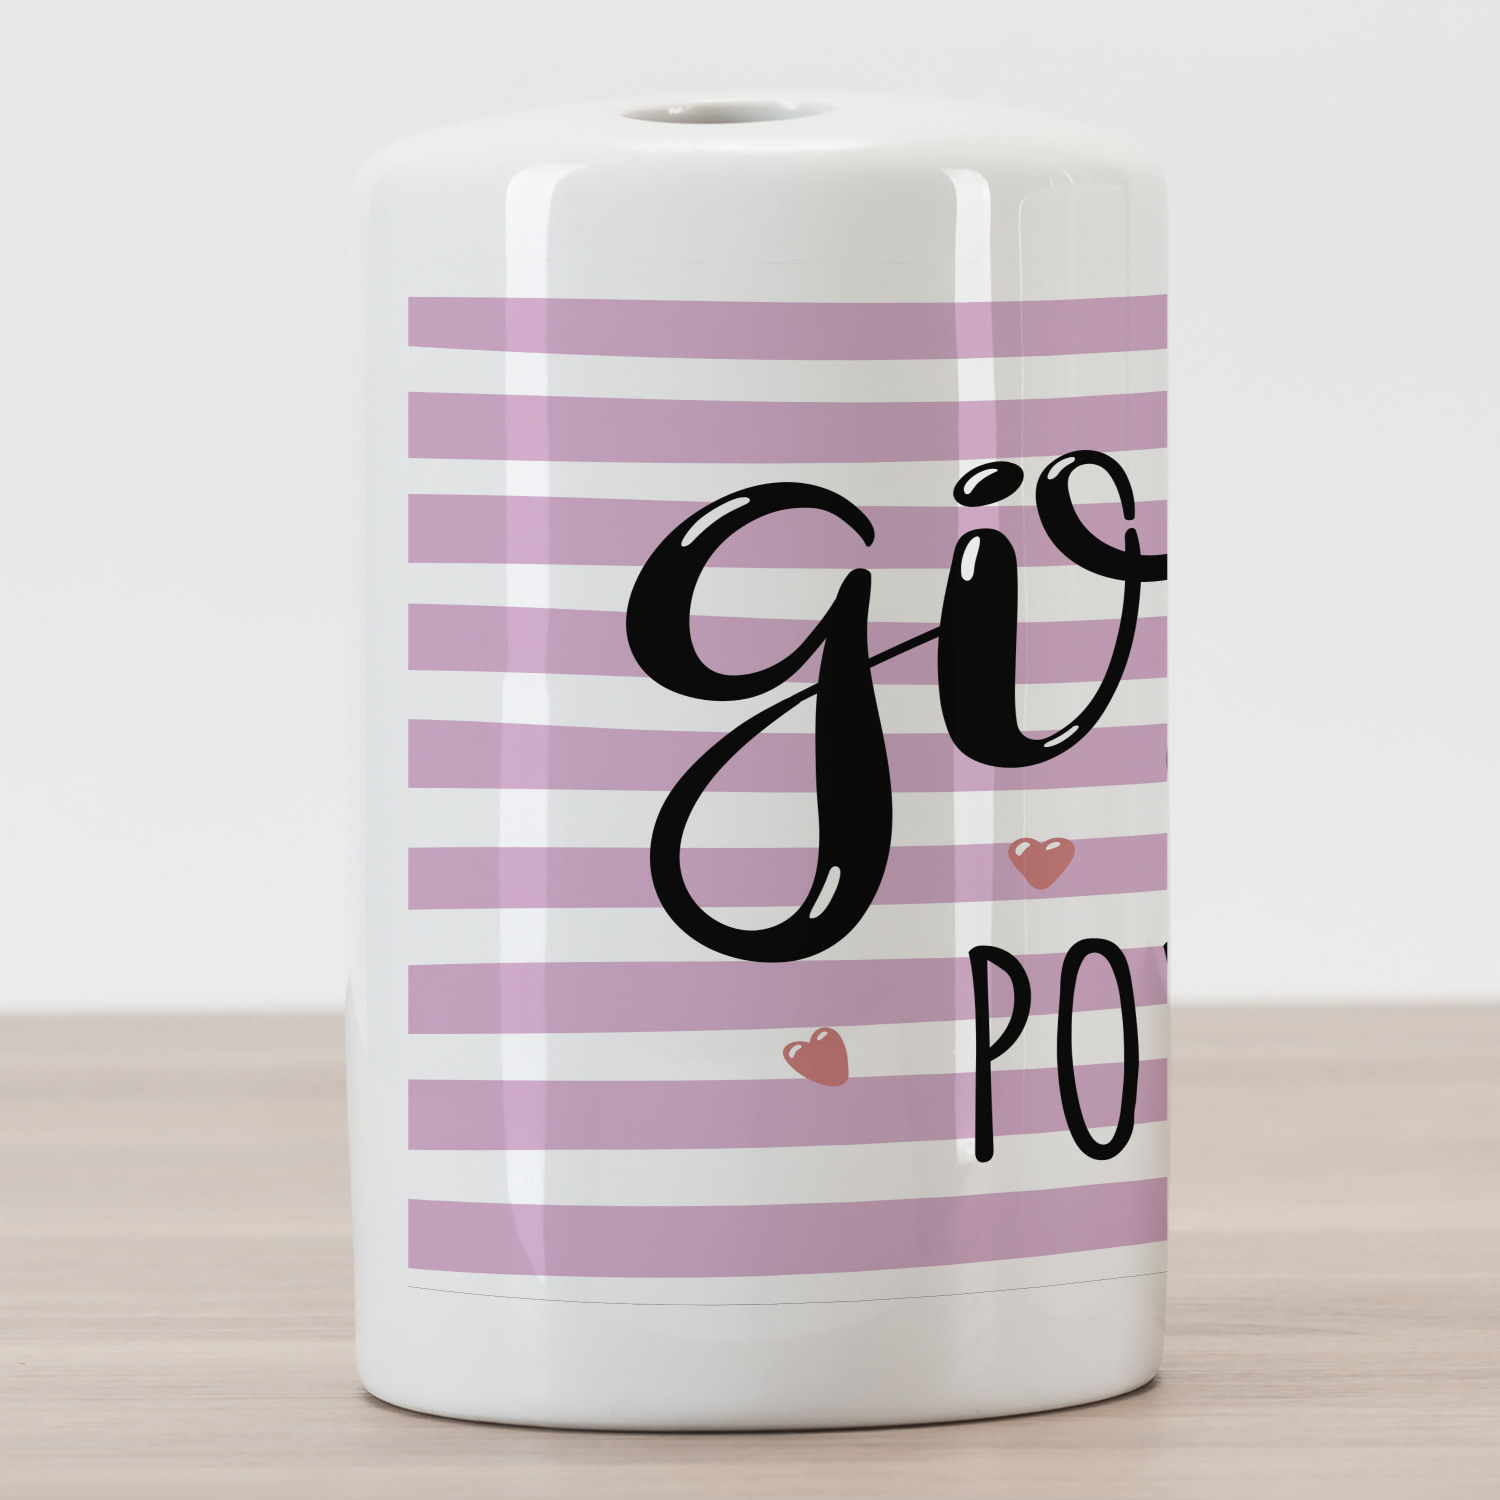 Lettering Ceramic Toothbrush Holder, Girl Power Striped Hearts Teen Motivation Feminism Strong Words, Decorative Versatile Countertop for Bathroom, 4.5" X 2.7", Pale Pink Charcoal Grey - image 3 of 4